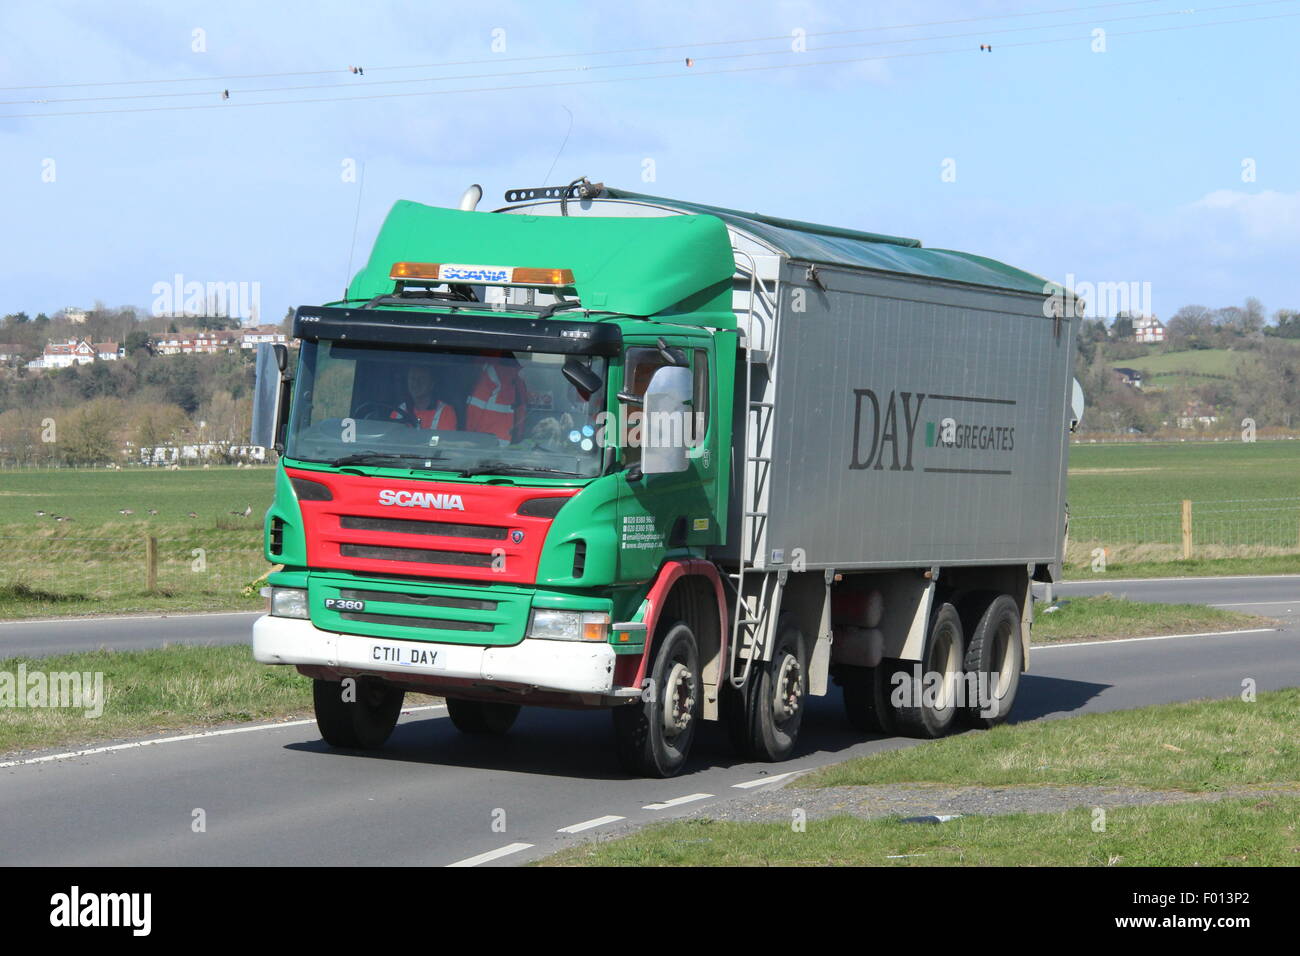 A Day Aggregates Scania truck on the road in East Sussex Stock Photo